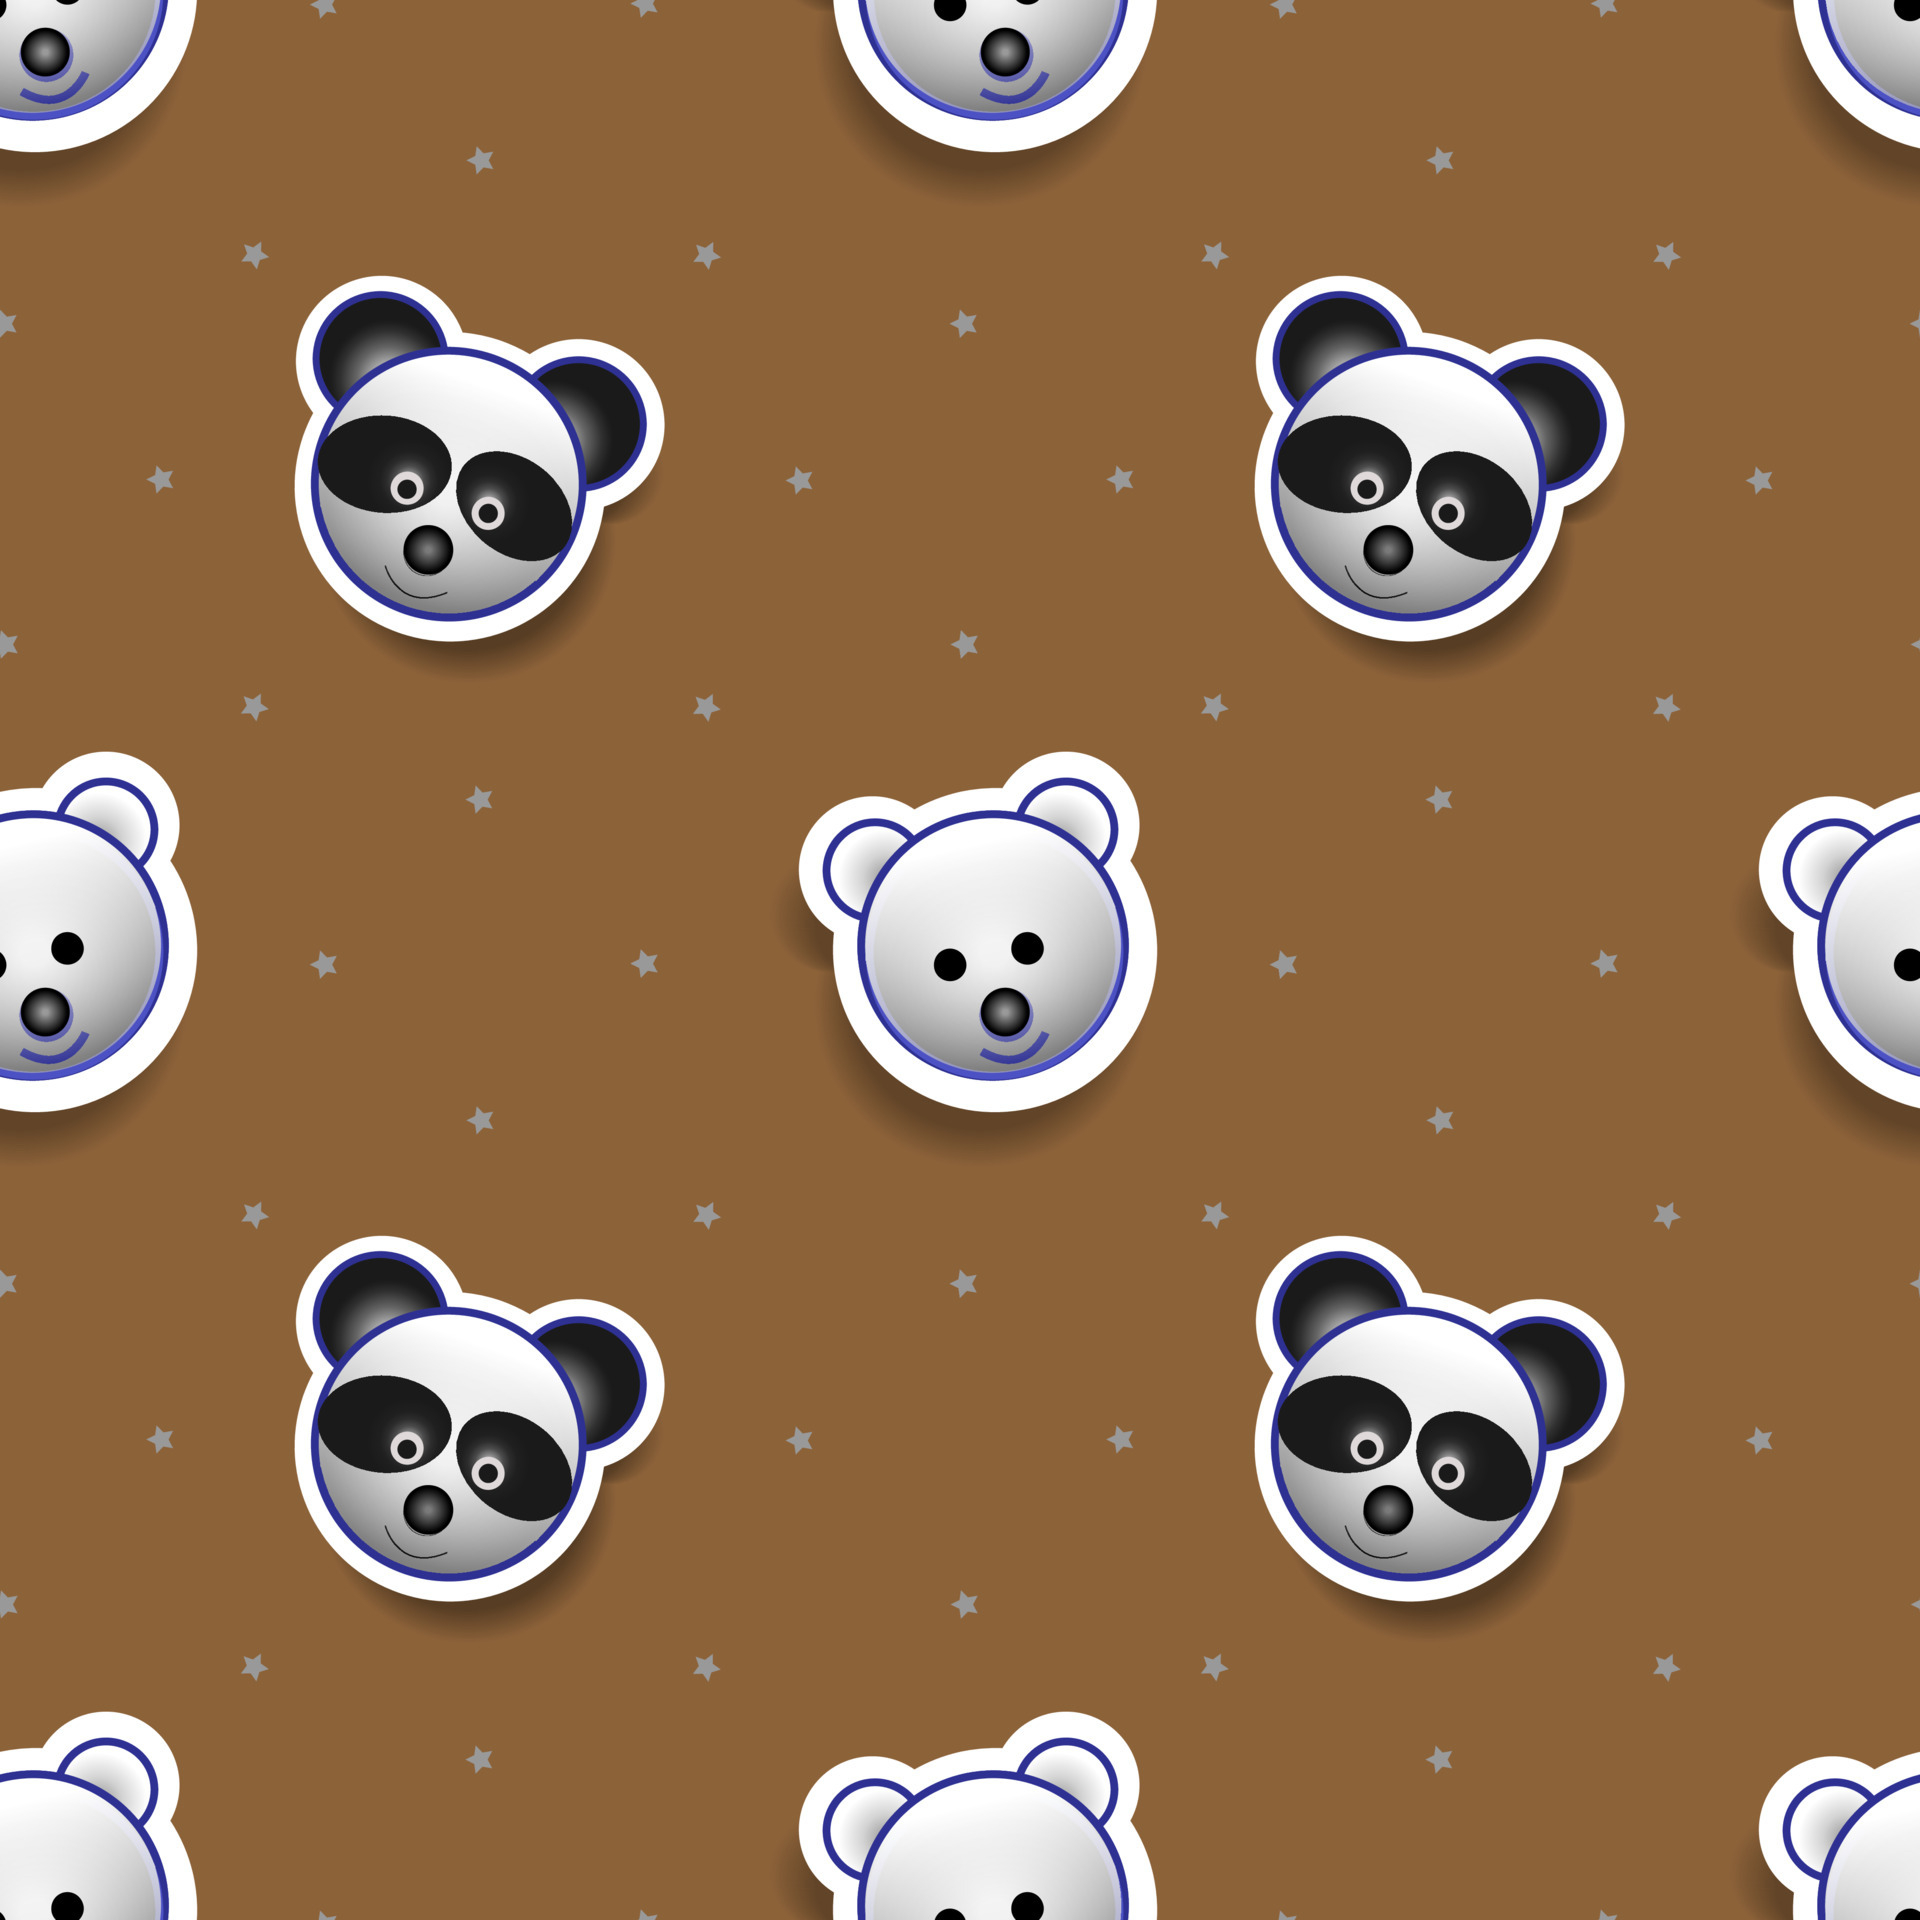 1920x1920 vector illustration of panda bear animal face design. brown background. Seamless pattern designs for wallpapers, backdrops, covers, paper cut, stickers and prints on fabric. 4412030 Vector Art